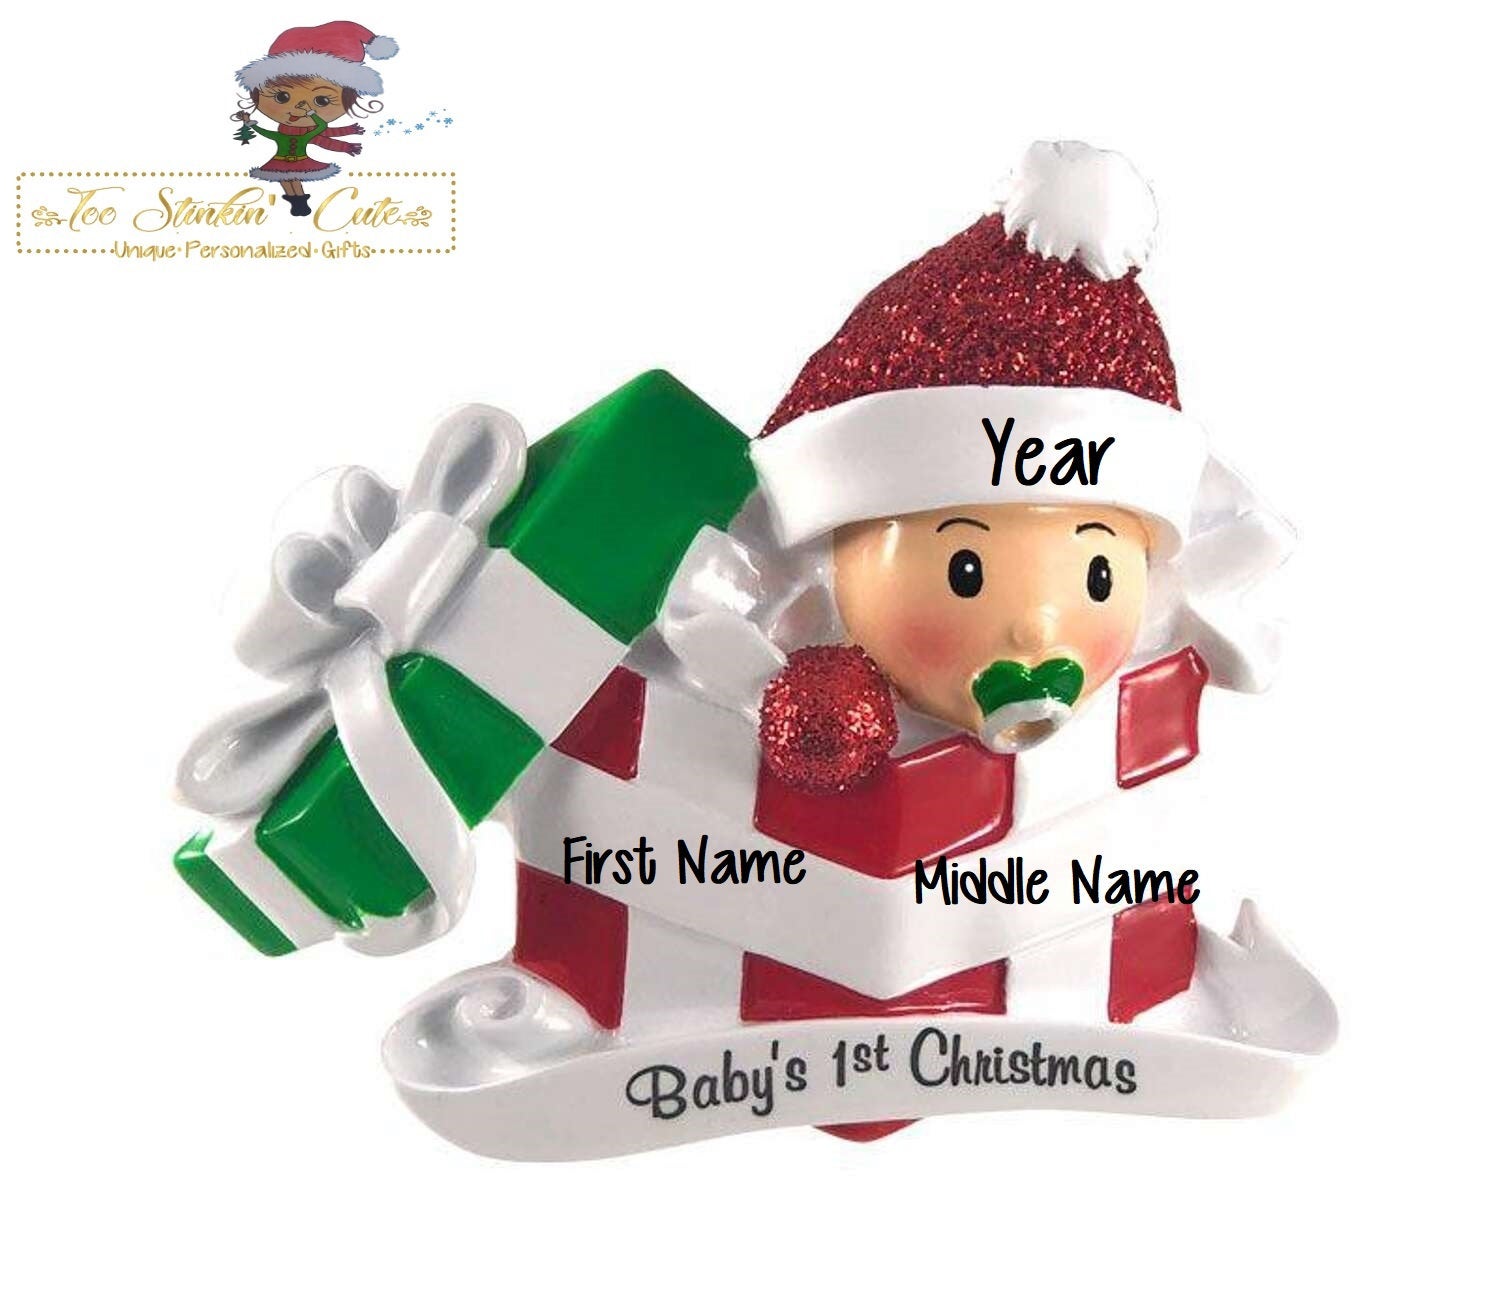 Christmas Ornament Baby in Red Present/ Baby's 1st Christmas/ Newborn/ New Baby - Personalized + Free Shipping!